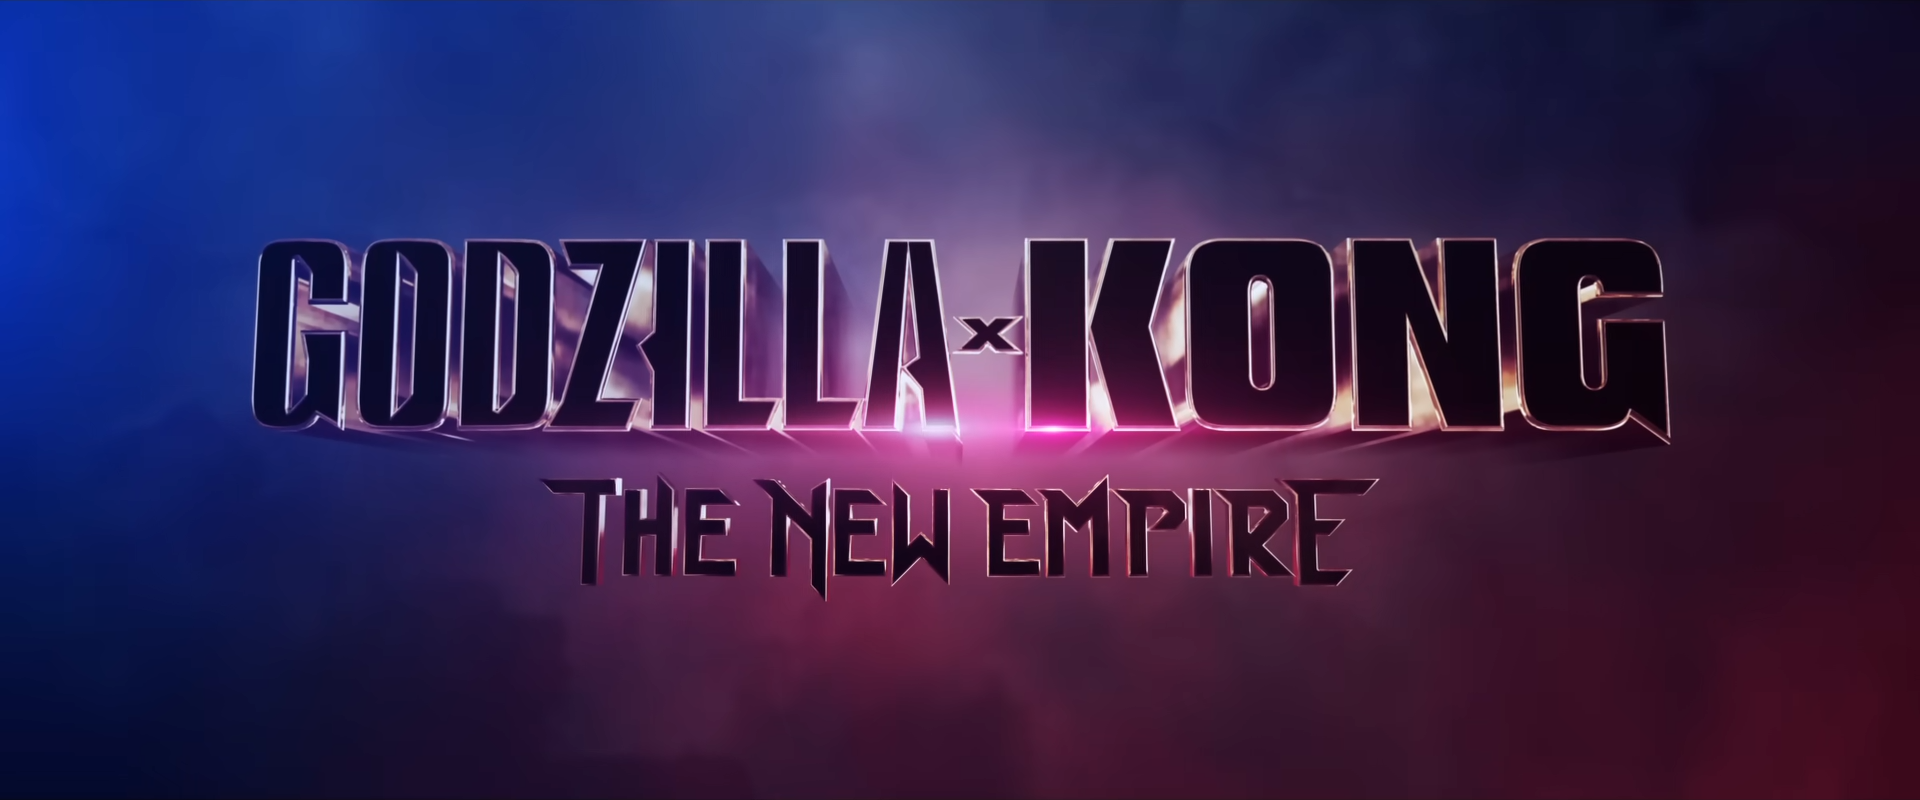 Warner Bros. Unleashes the Titans GODZILLA X KONG: THE NEW EMPIRE Tickets Now on Sale